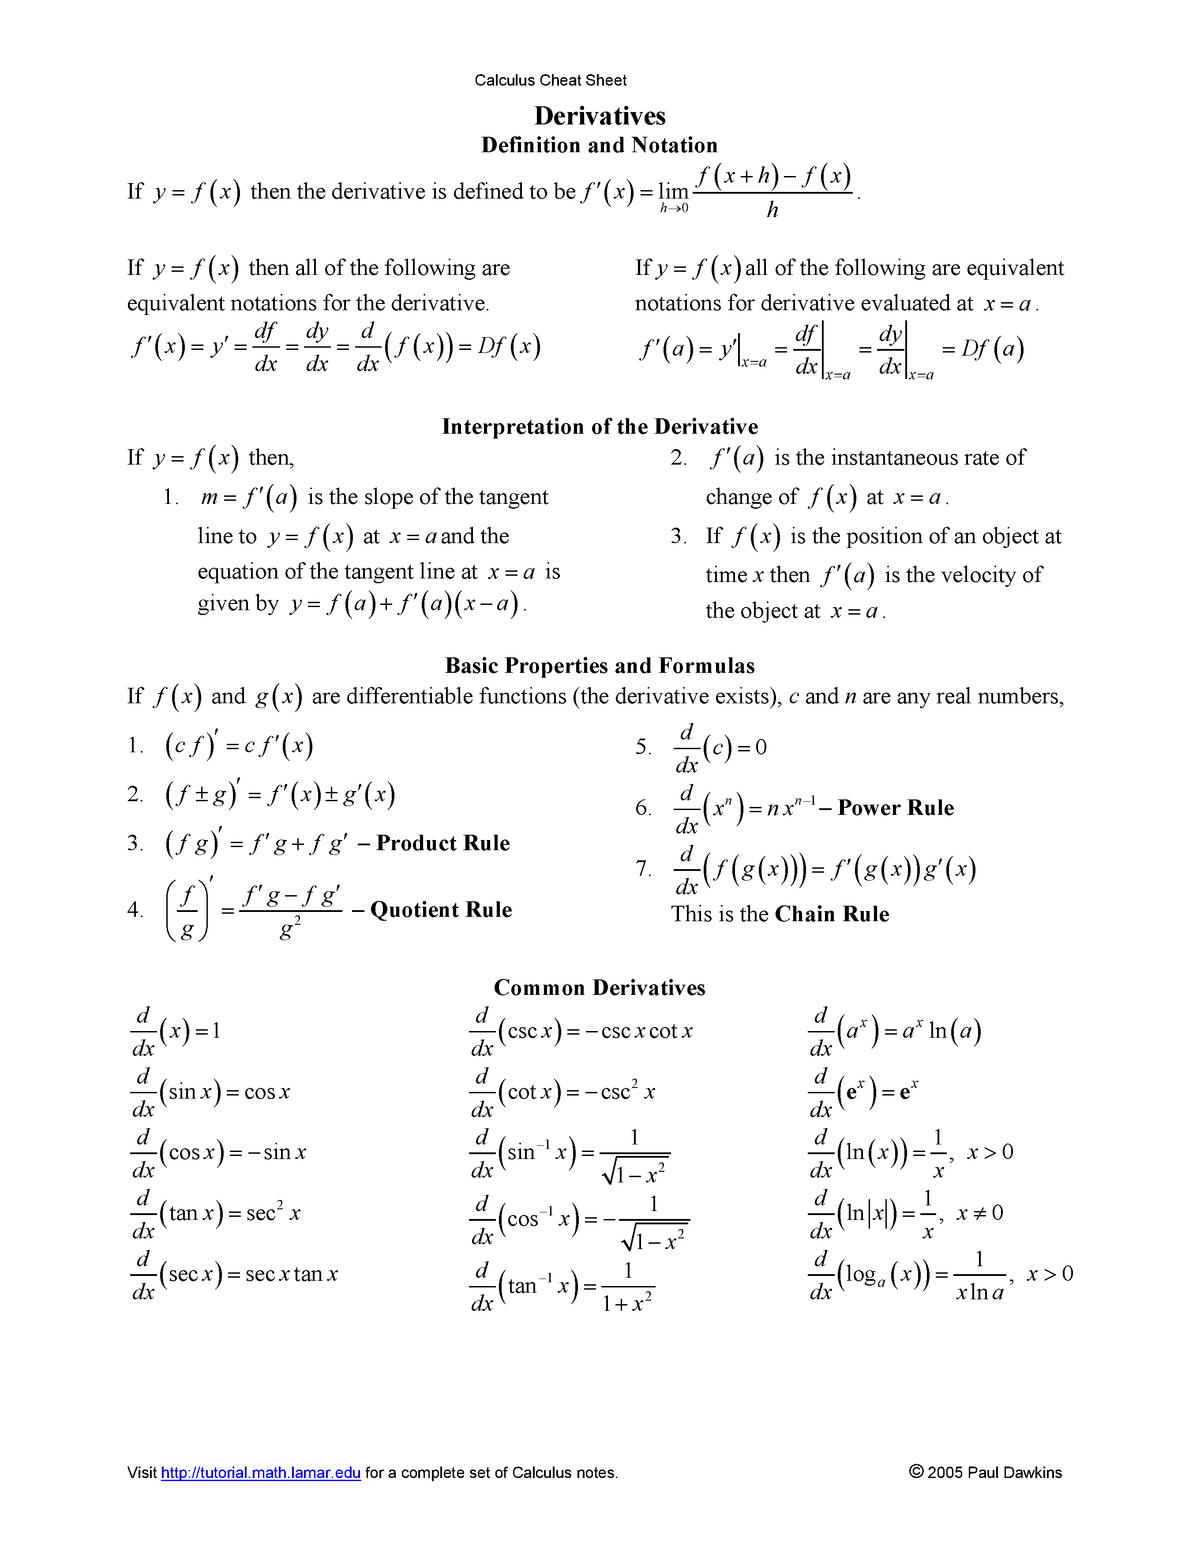 Calculus Cheat Sheet Derivatives Calculus Cheat Sheet Derivatives Definition And Notation If Then The Derivative Is Defined To Be Lim If Then All Of The Studocu